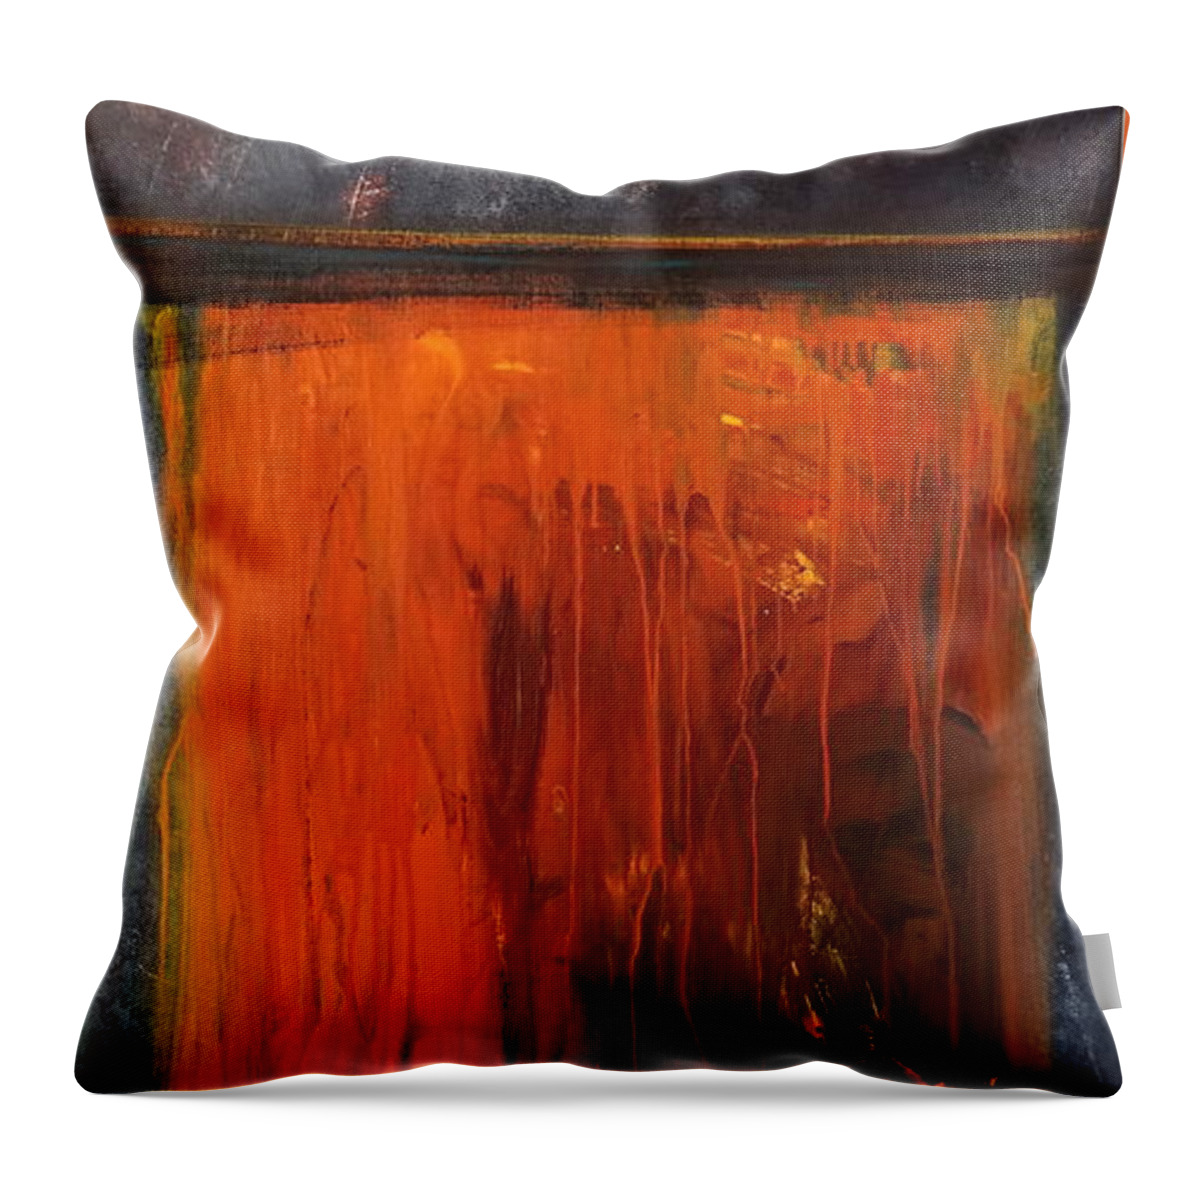 Abstract Throw Pillow featuring the painting African Dance by Theresa Marie Johnson